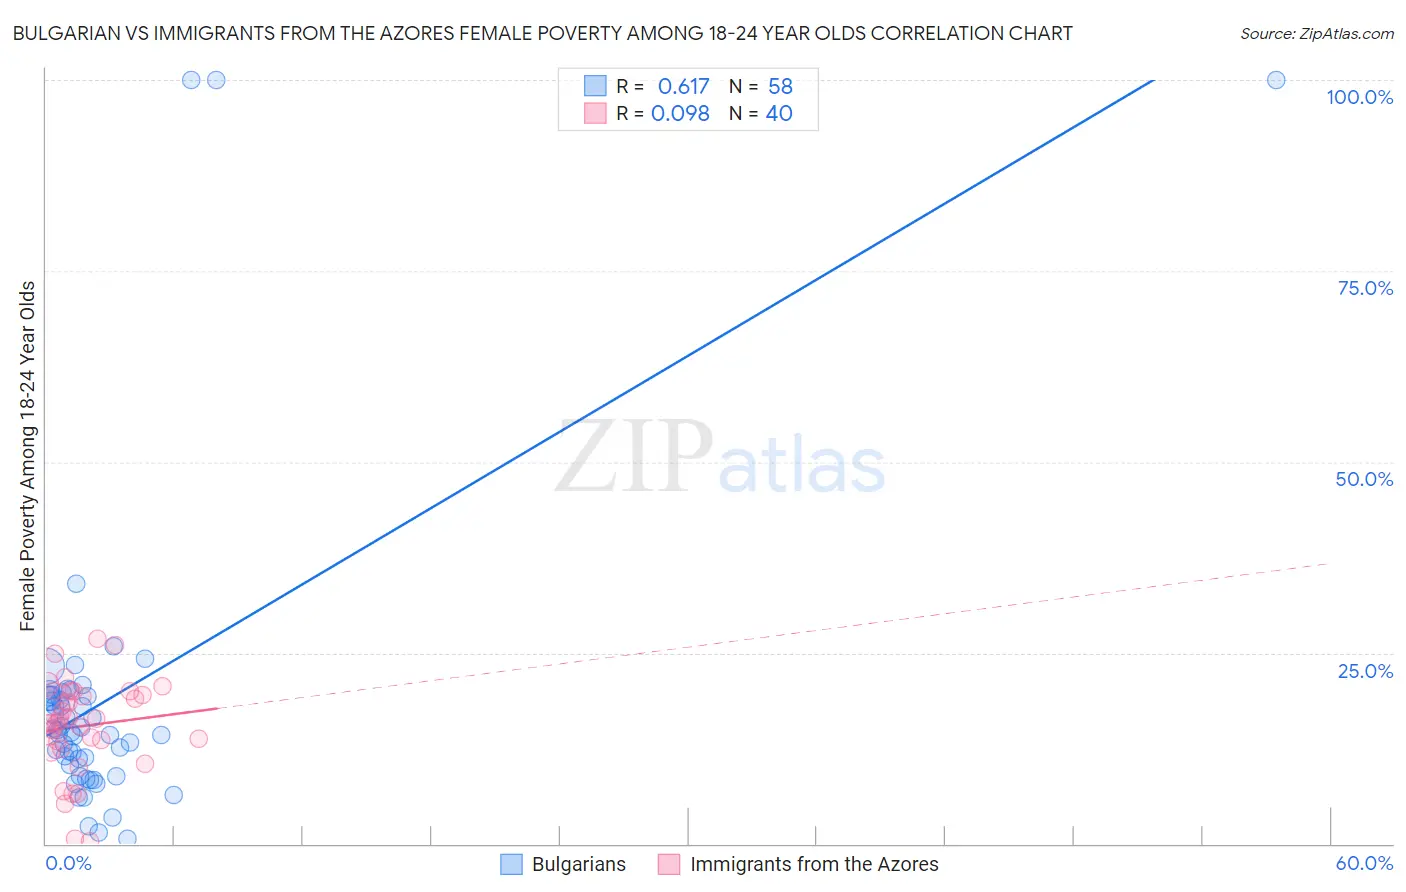 Bulgarian vs Immigrants from the Azores Female Poverty Among 18-24 Year Olds